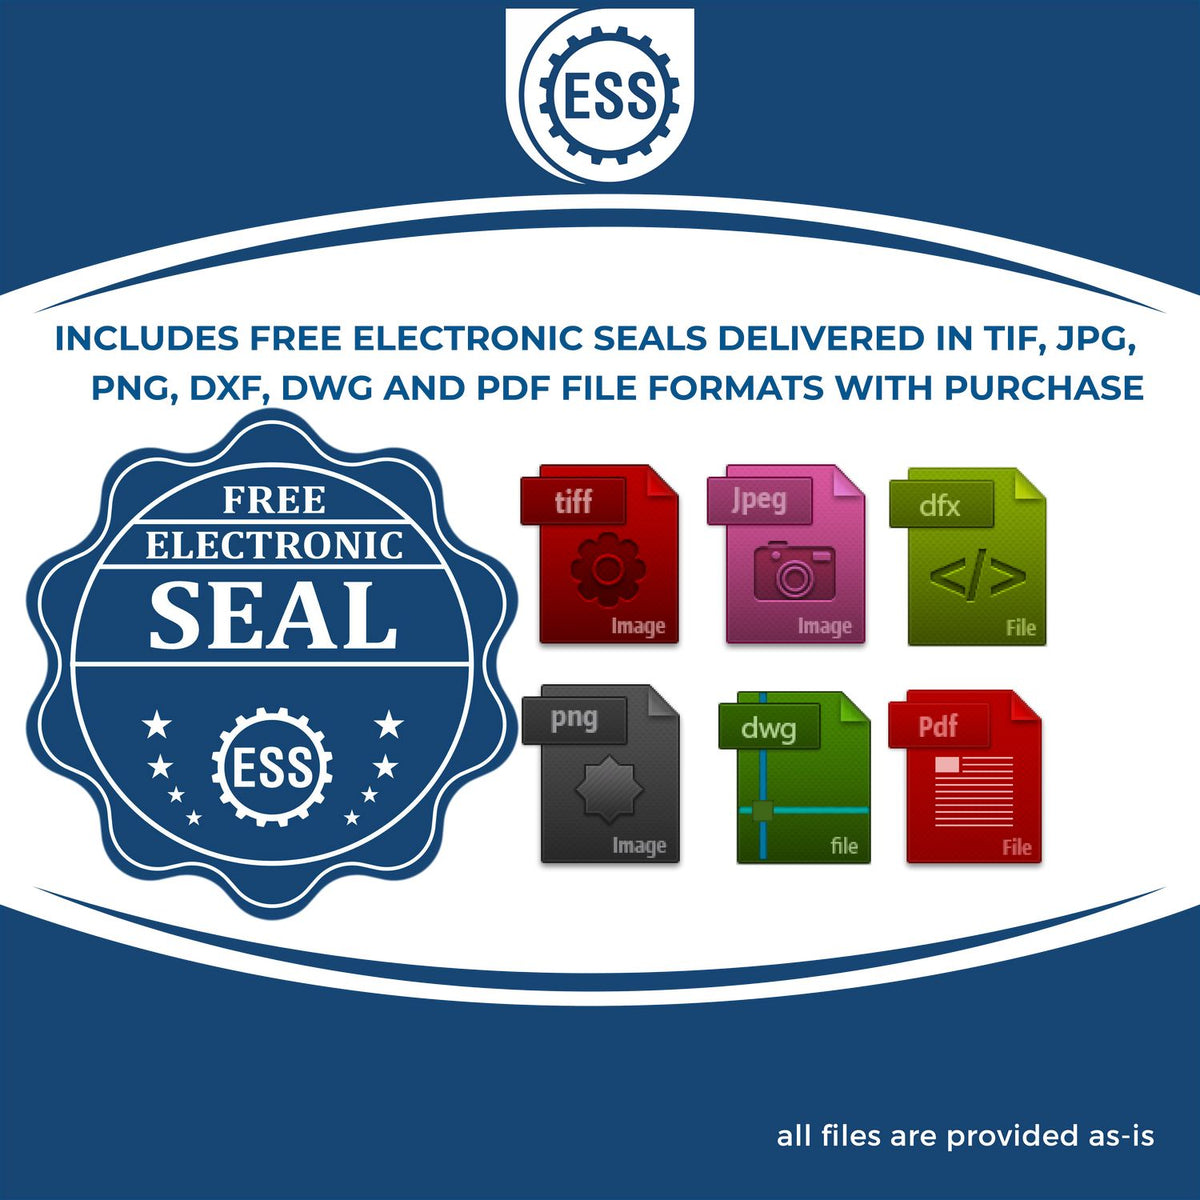 An infographic for the free electronic seal for the Self-Inking New York PE Stamp illustrating the different file type icons such as DXF, DWG, TIF, JPG and PNG.